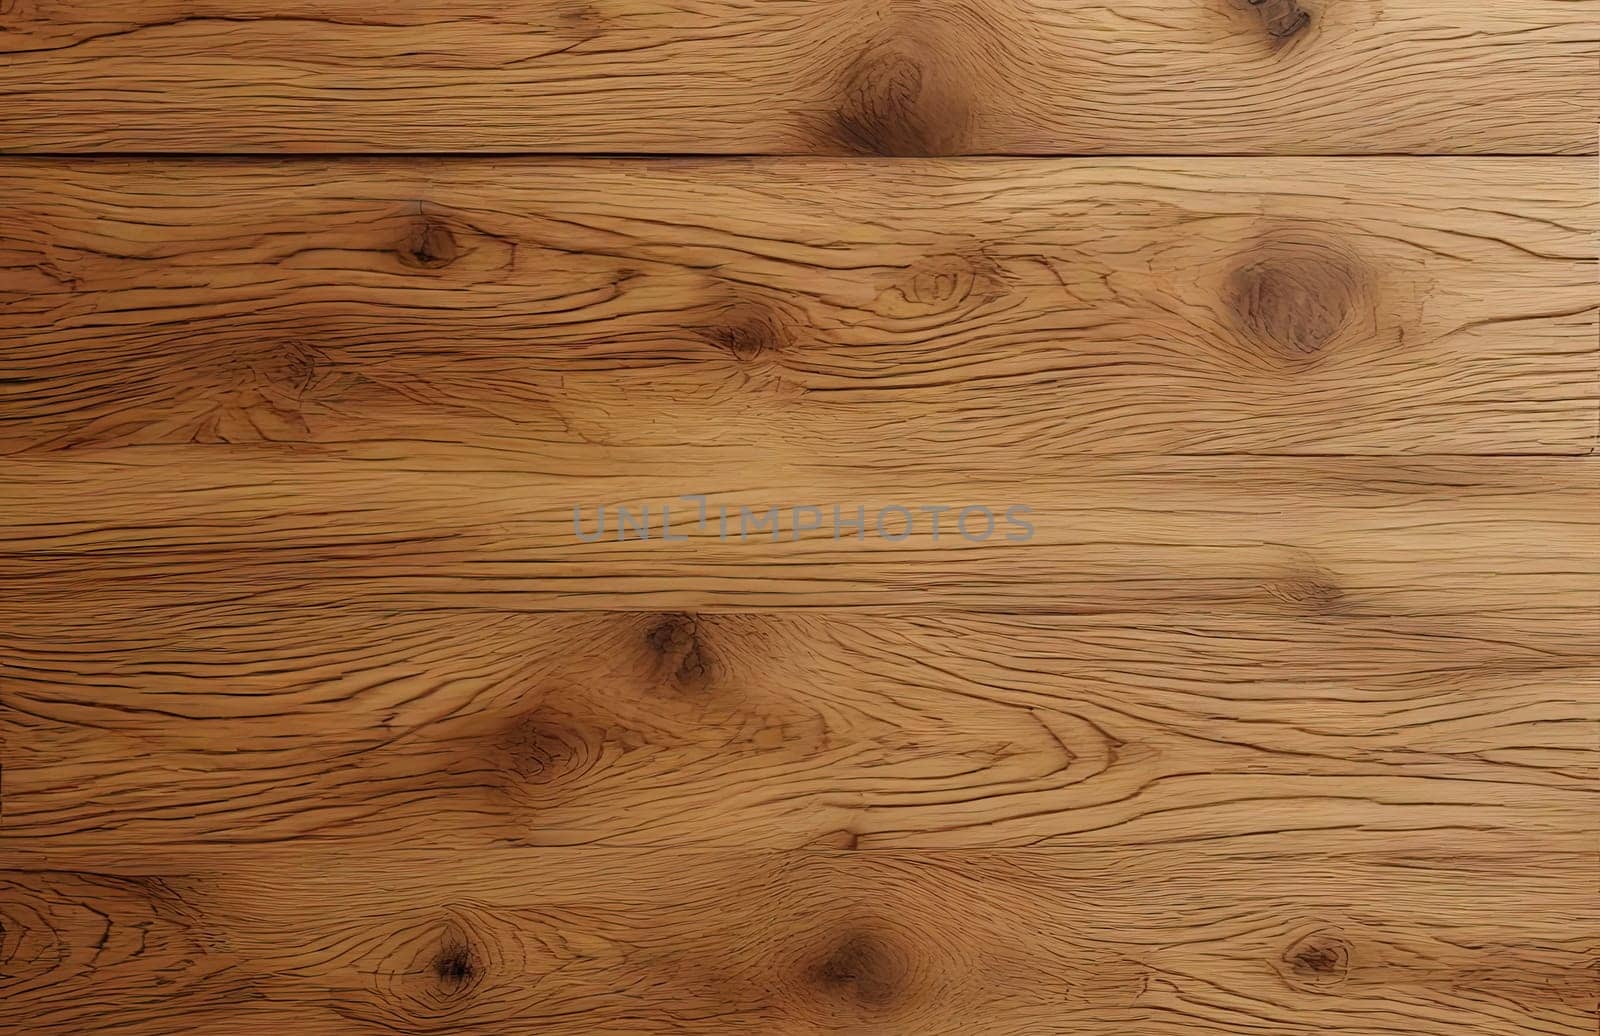 wood texture background with natural figure. wooden panels surface for wall tile design